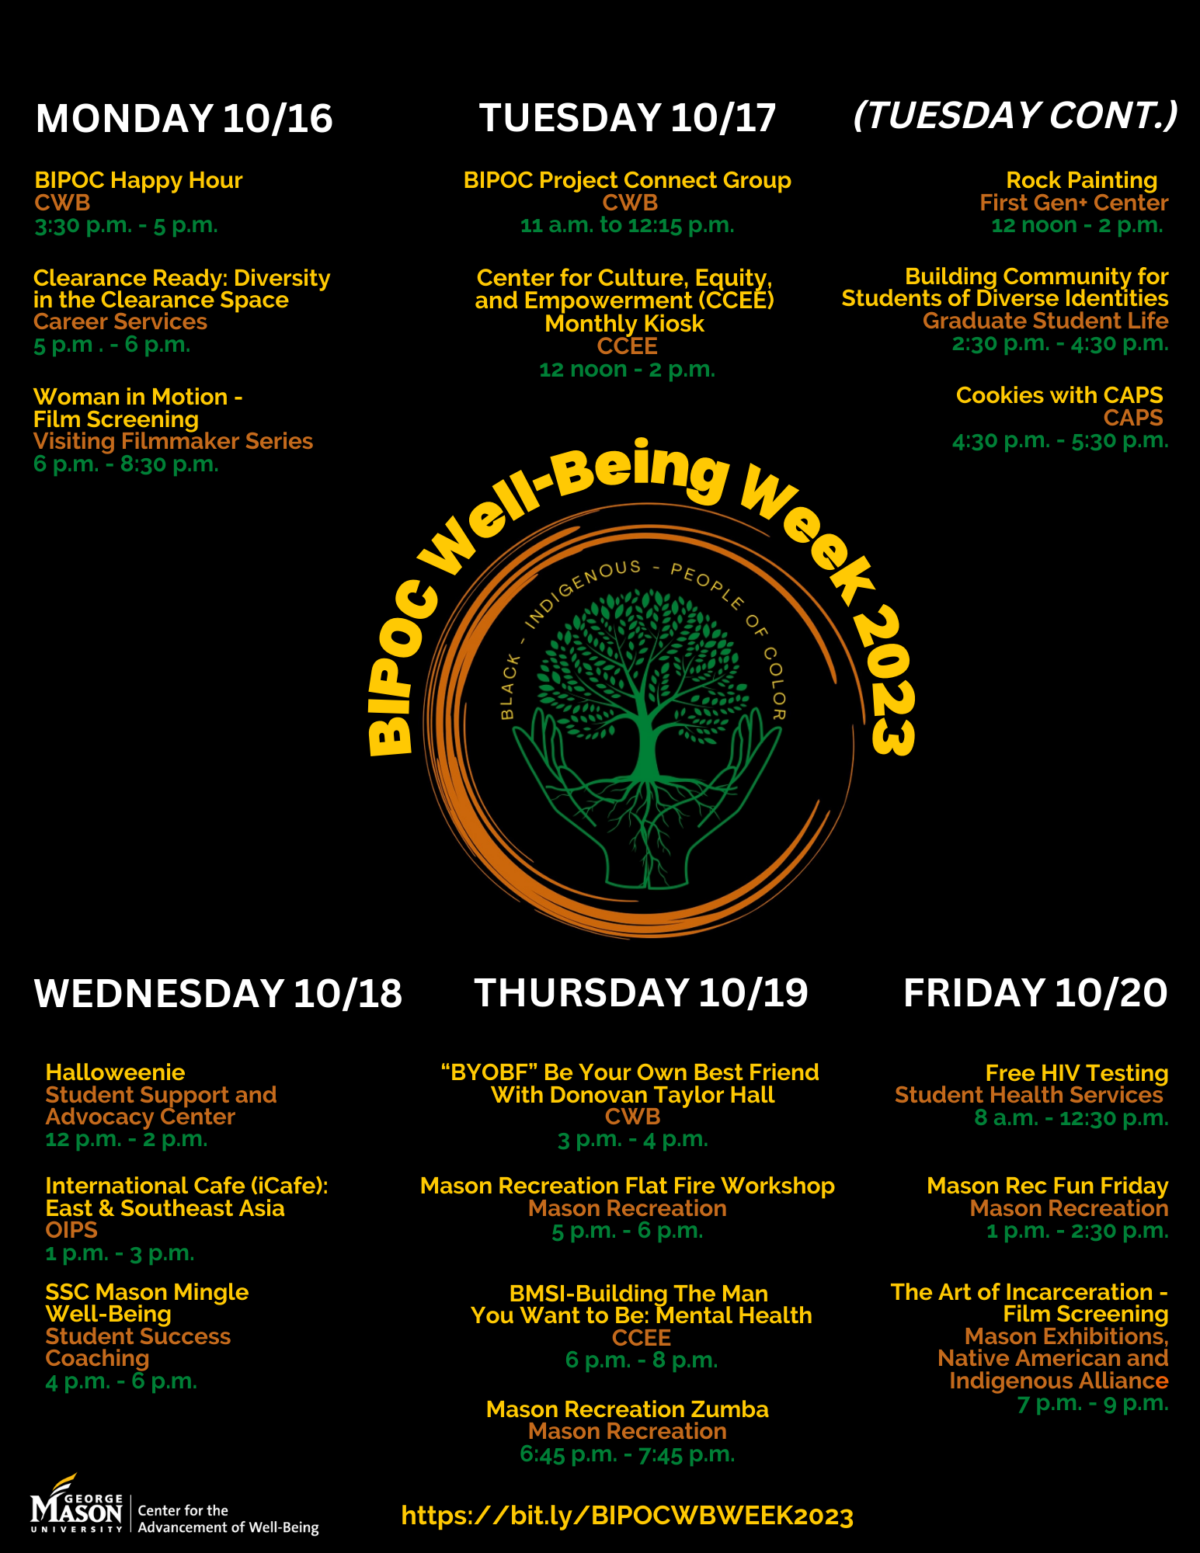 BIPOC Well-Being Week 2023 events